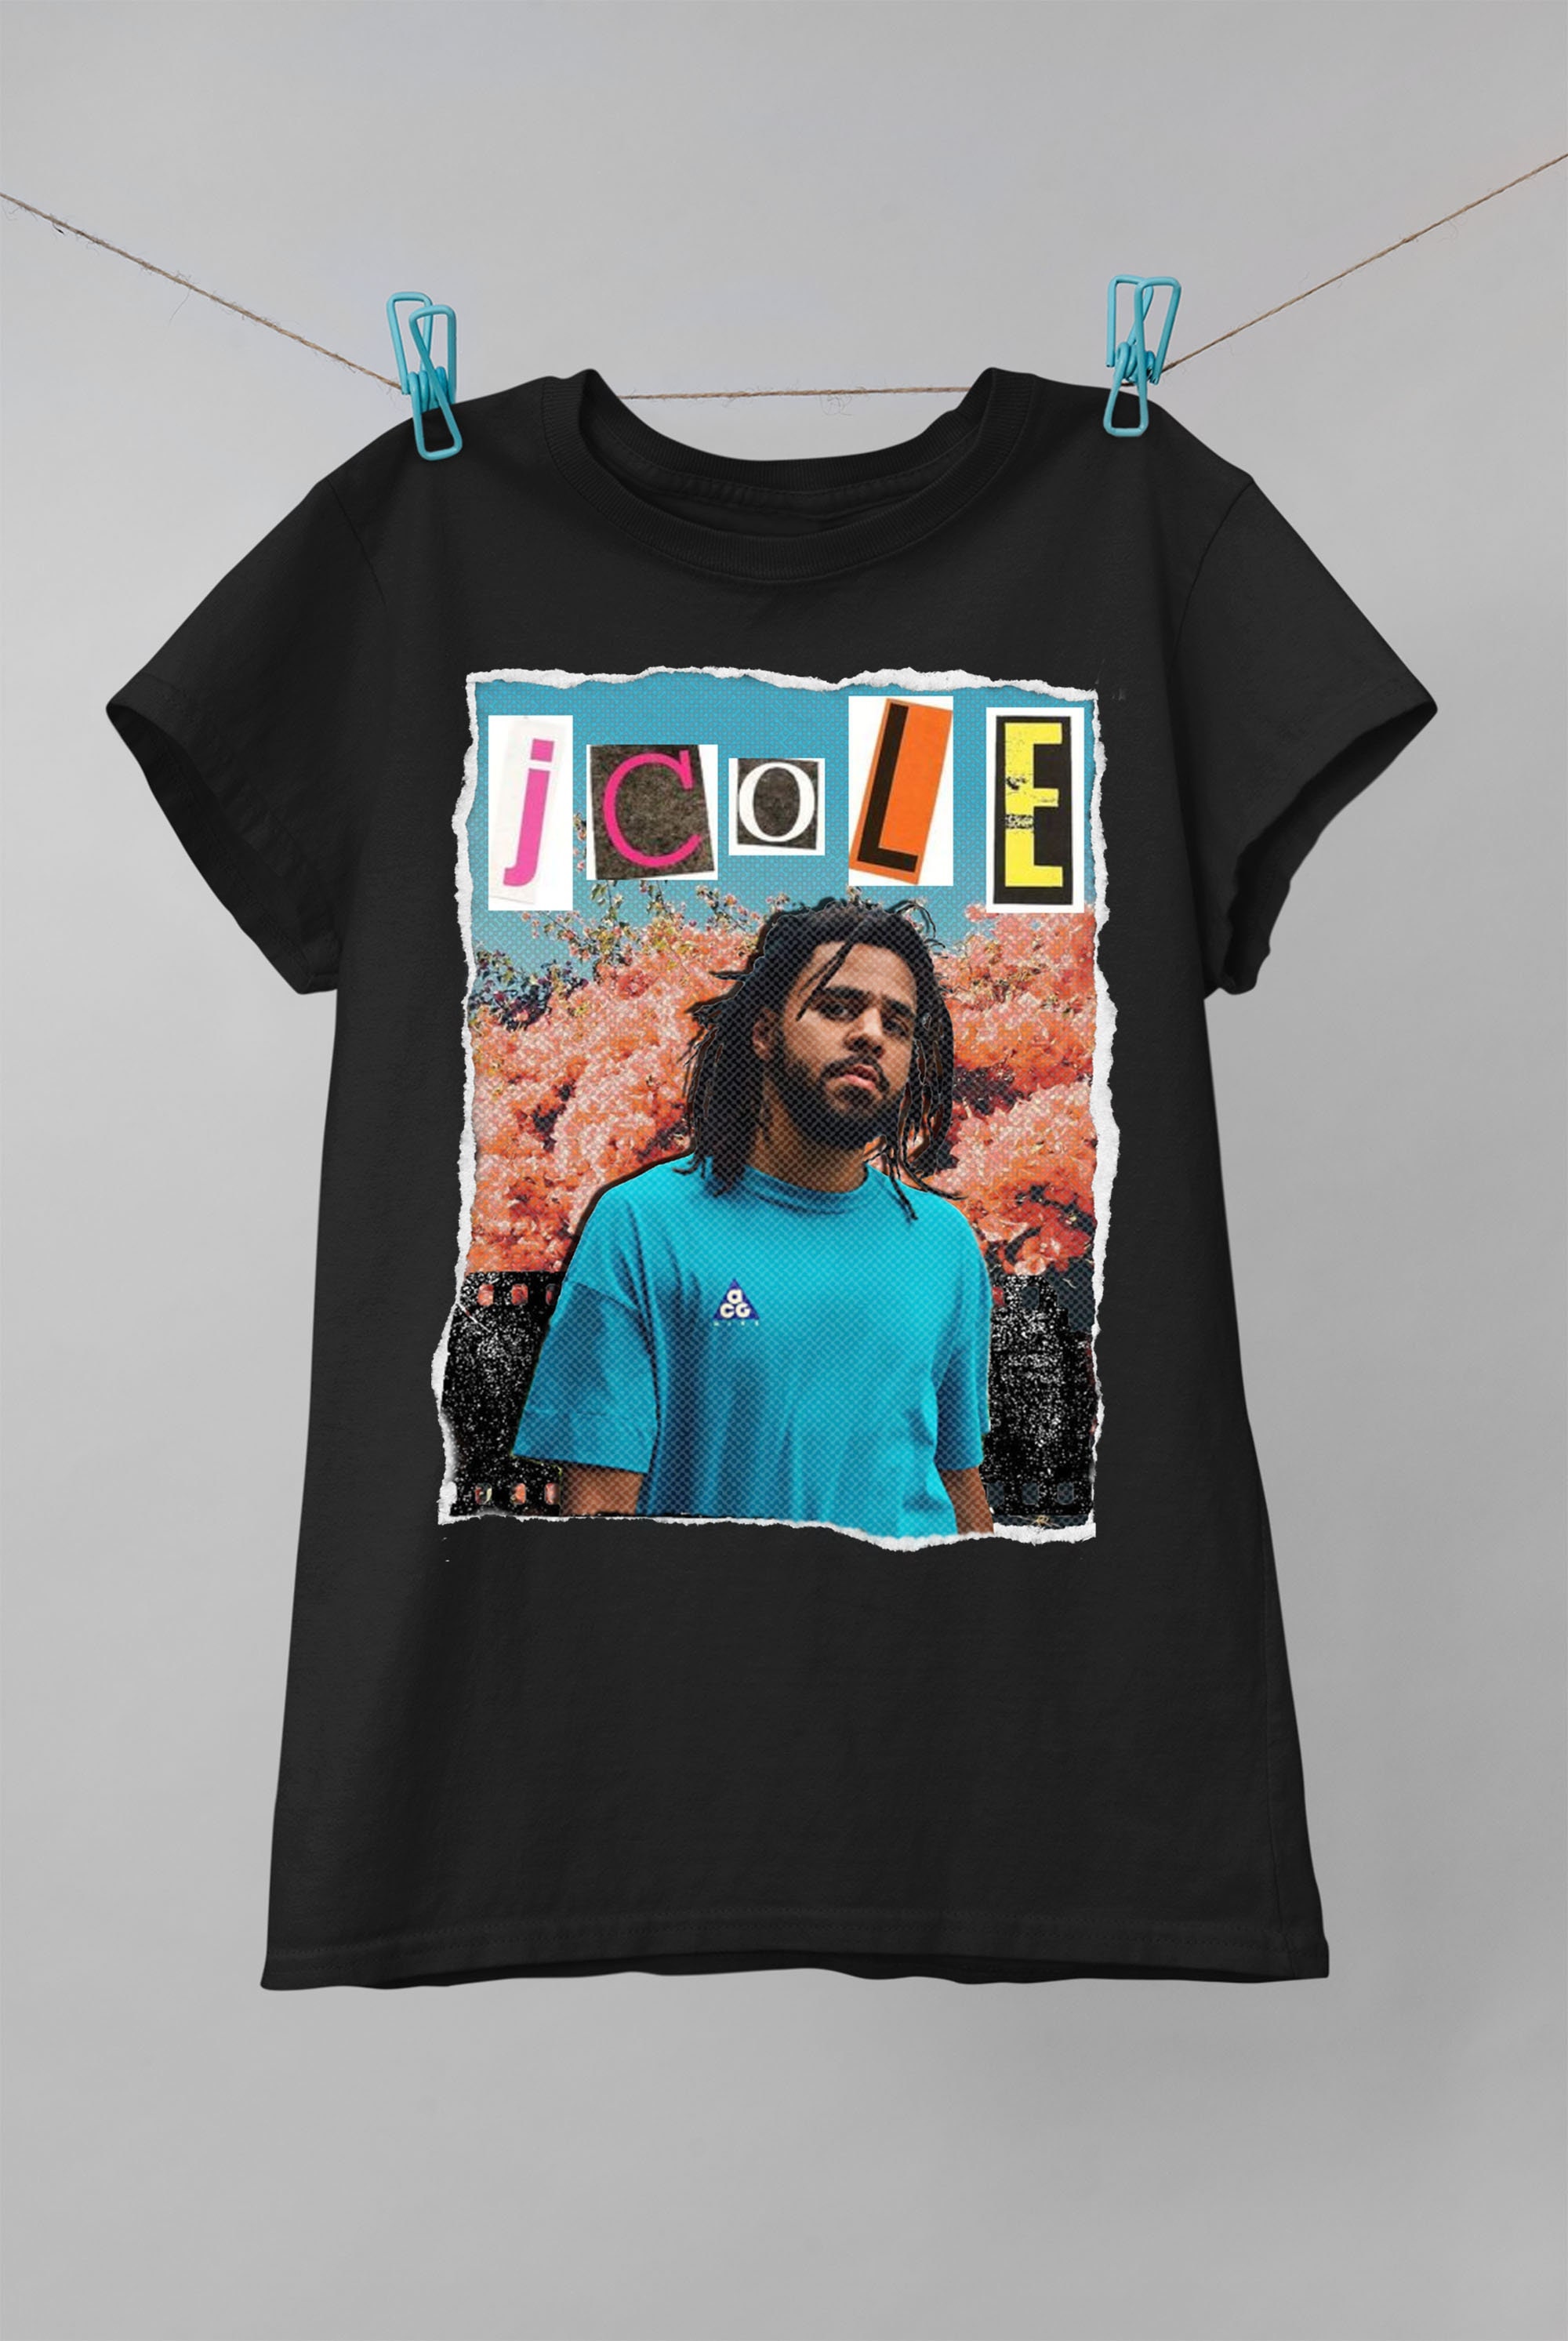 J Cole Music Man Sports Casual Short Sleeved Round Neck Tees